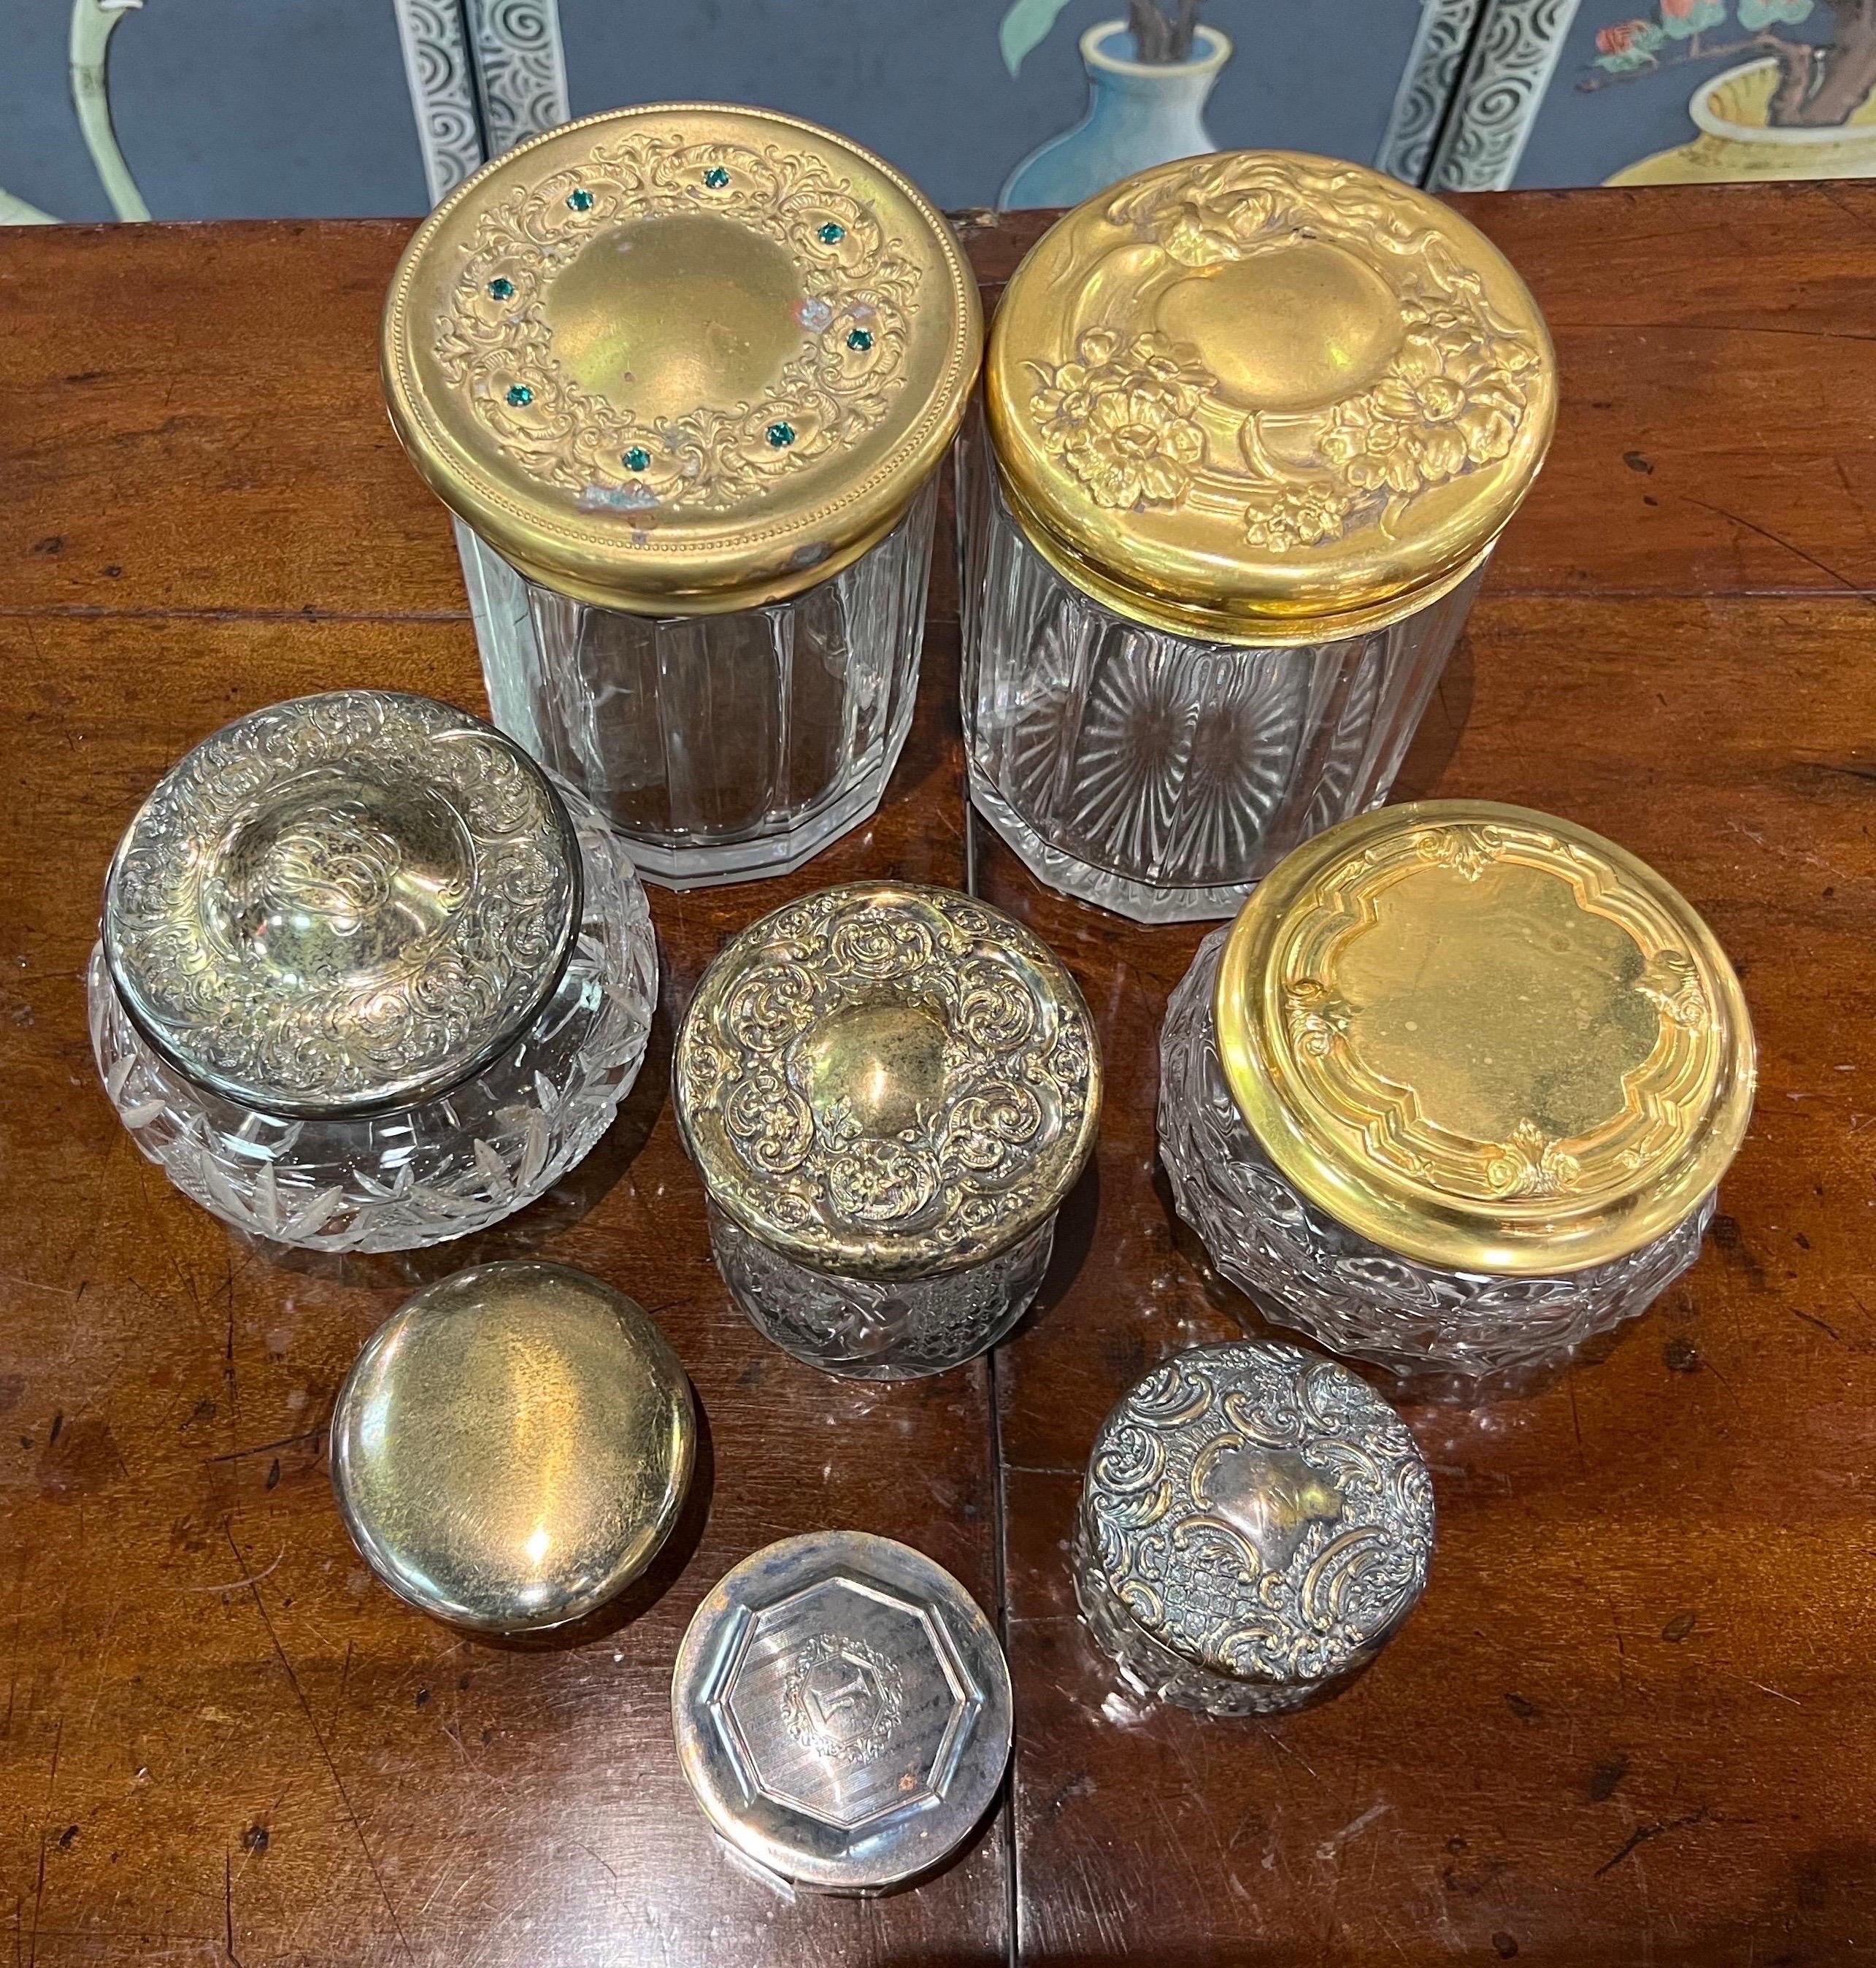 Set of 8 cut glass jars- some with pressed brass lids, some with silver lids. A few of the silver ones are marked with hallmarks. One of the grass lids is encrusted with jewels. 

Dimensions listed is largest.